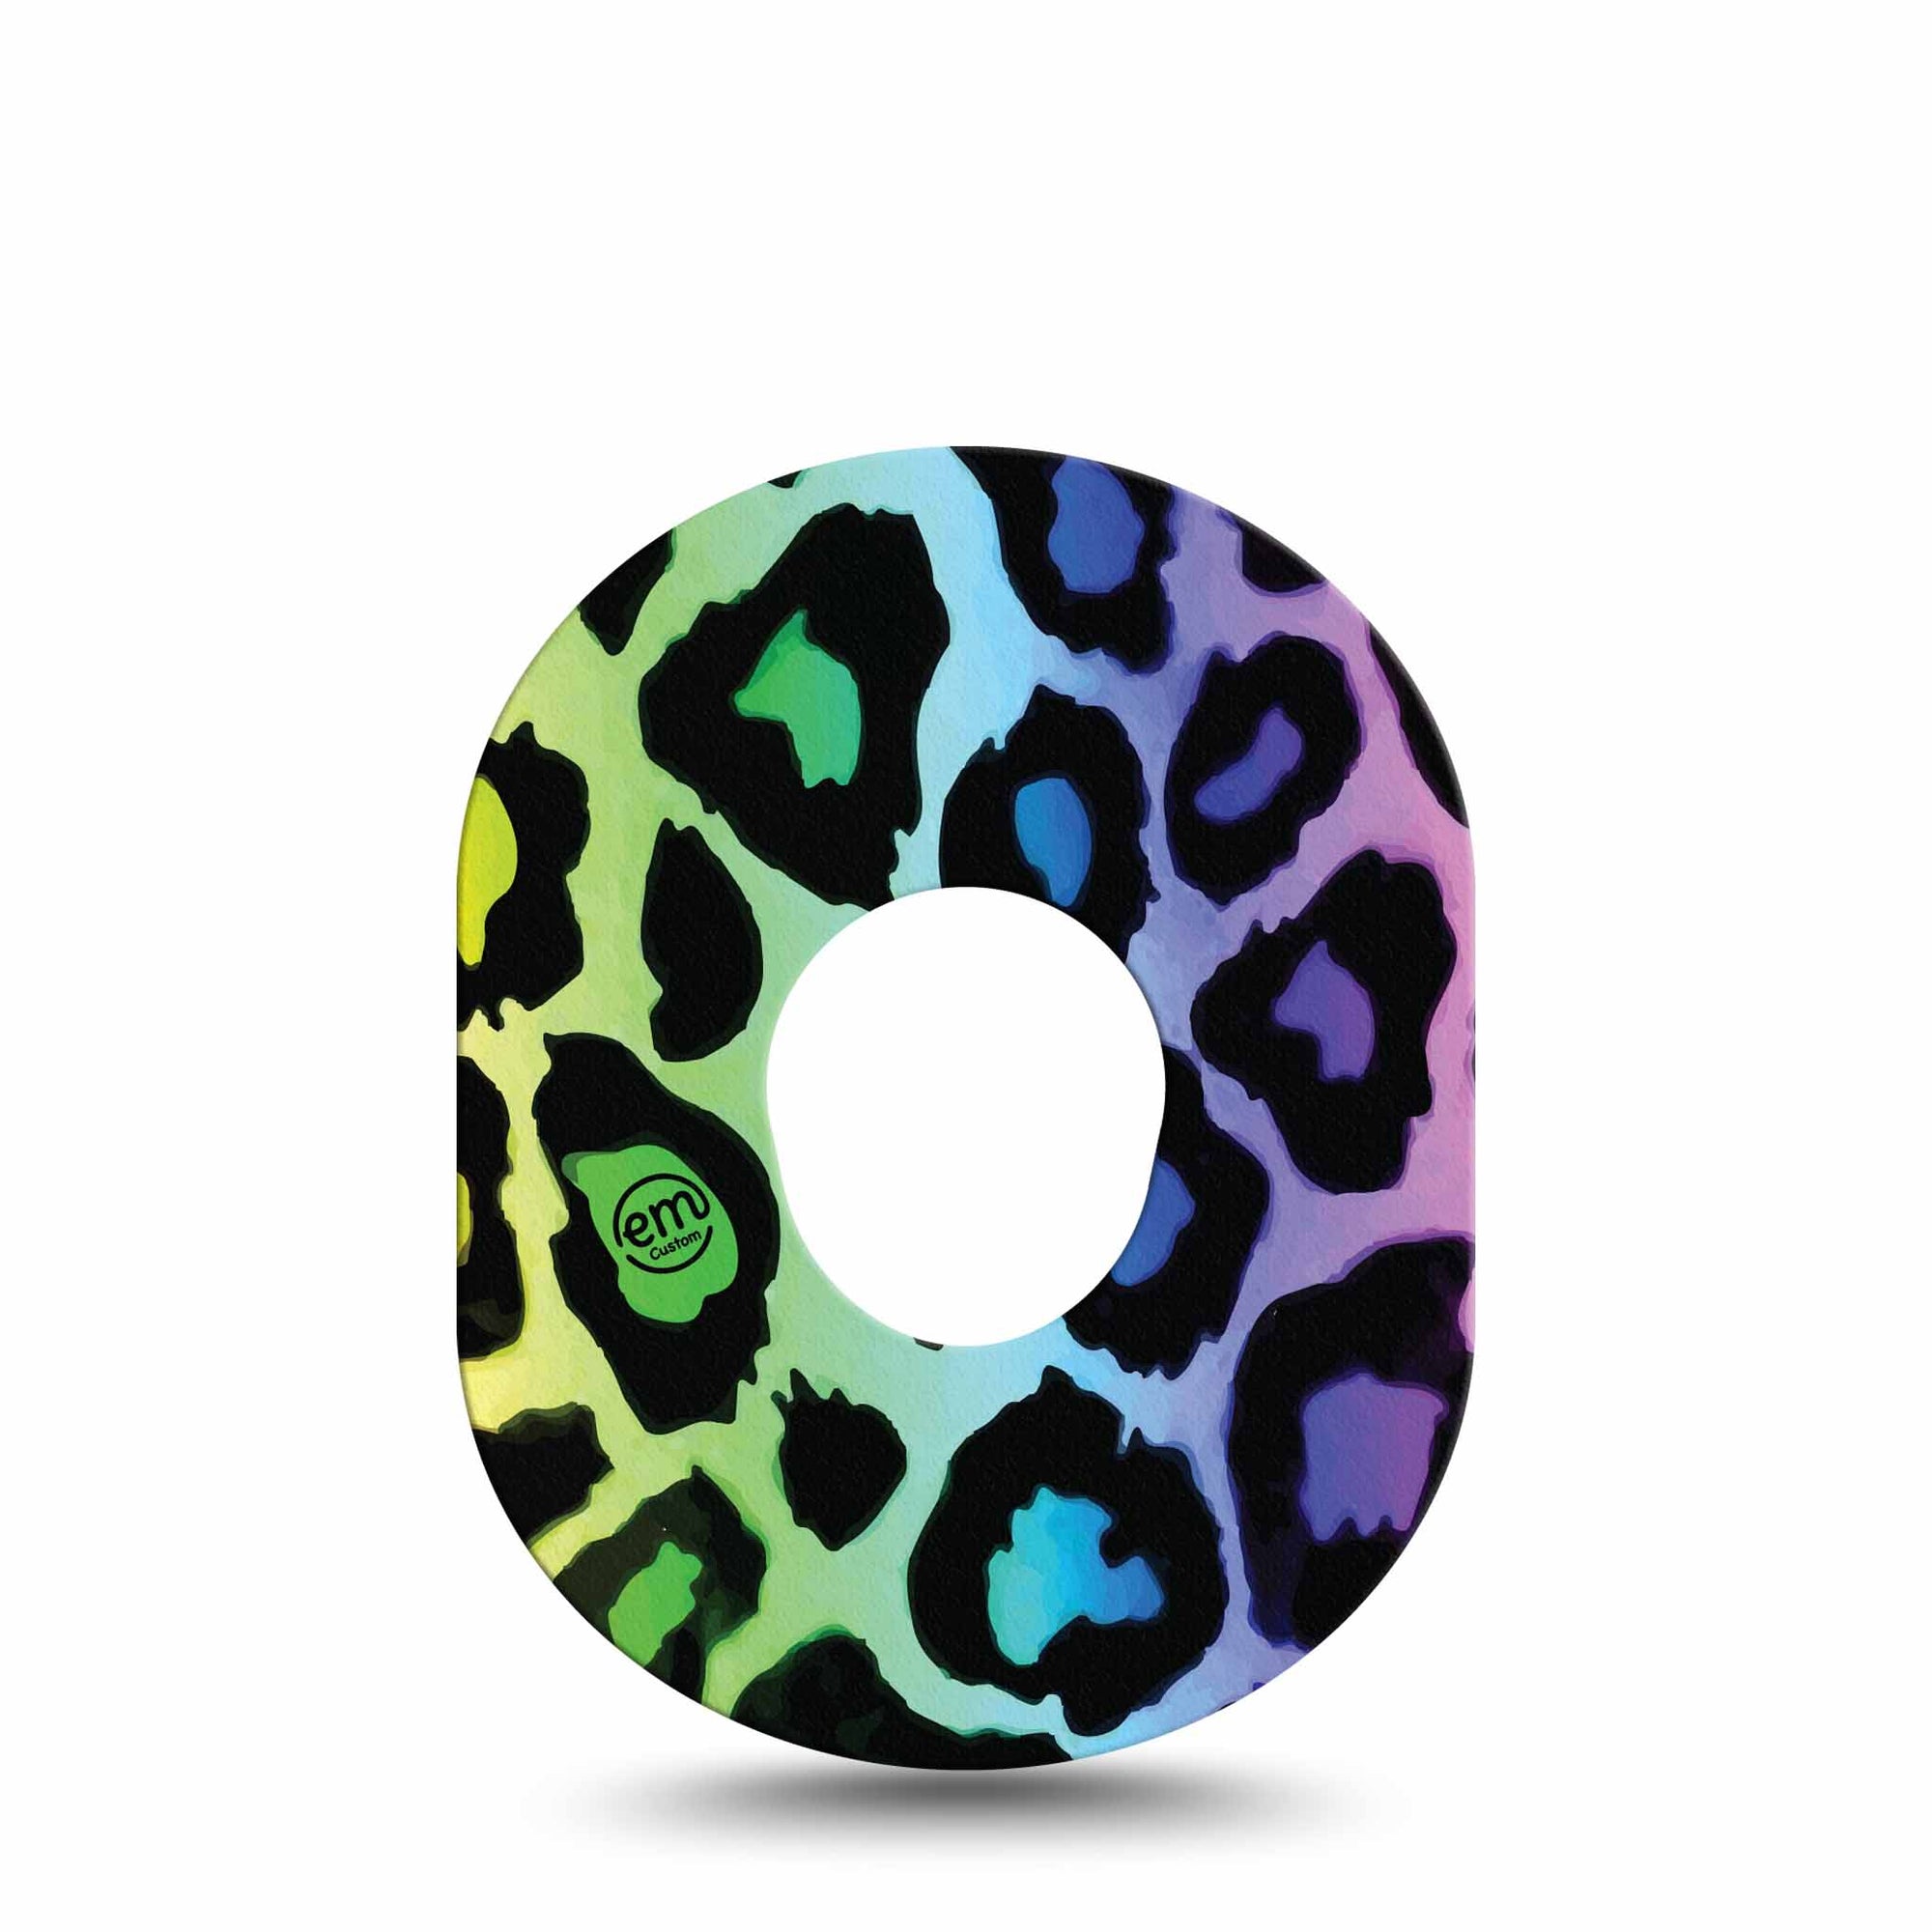 ExpressionMed Multicolored Cheetah Print Dexcom G7 Tape, Single, Cheetah Prints over Colorful Background, CGM Fixing Ring Patch Design